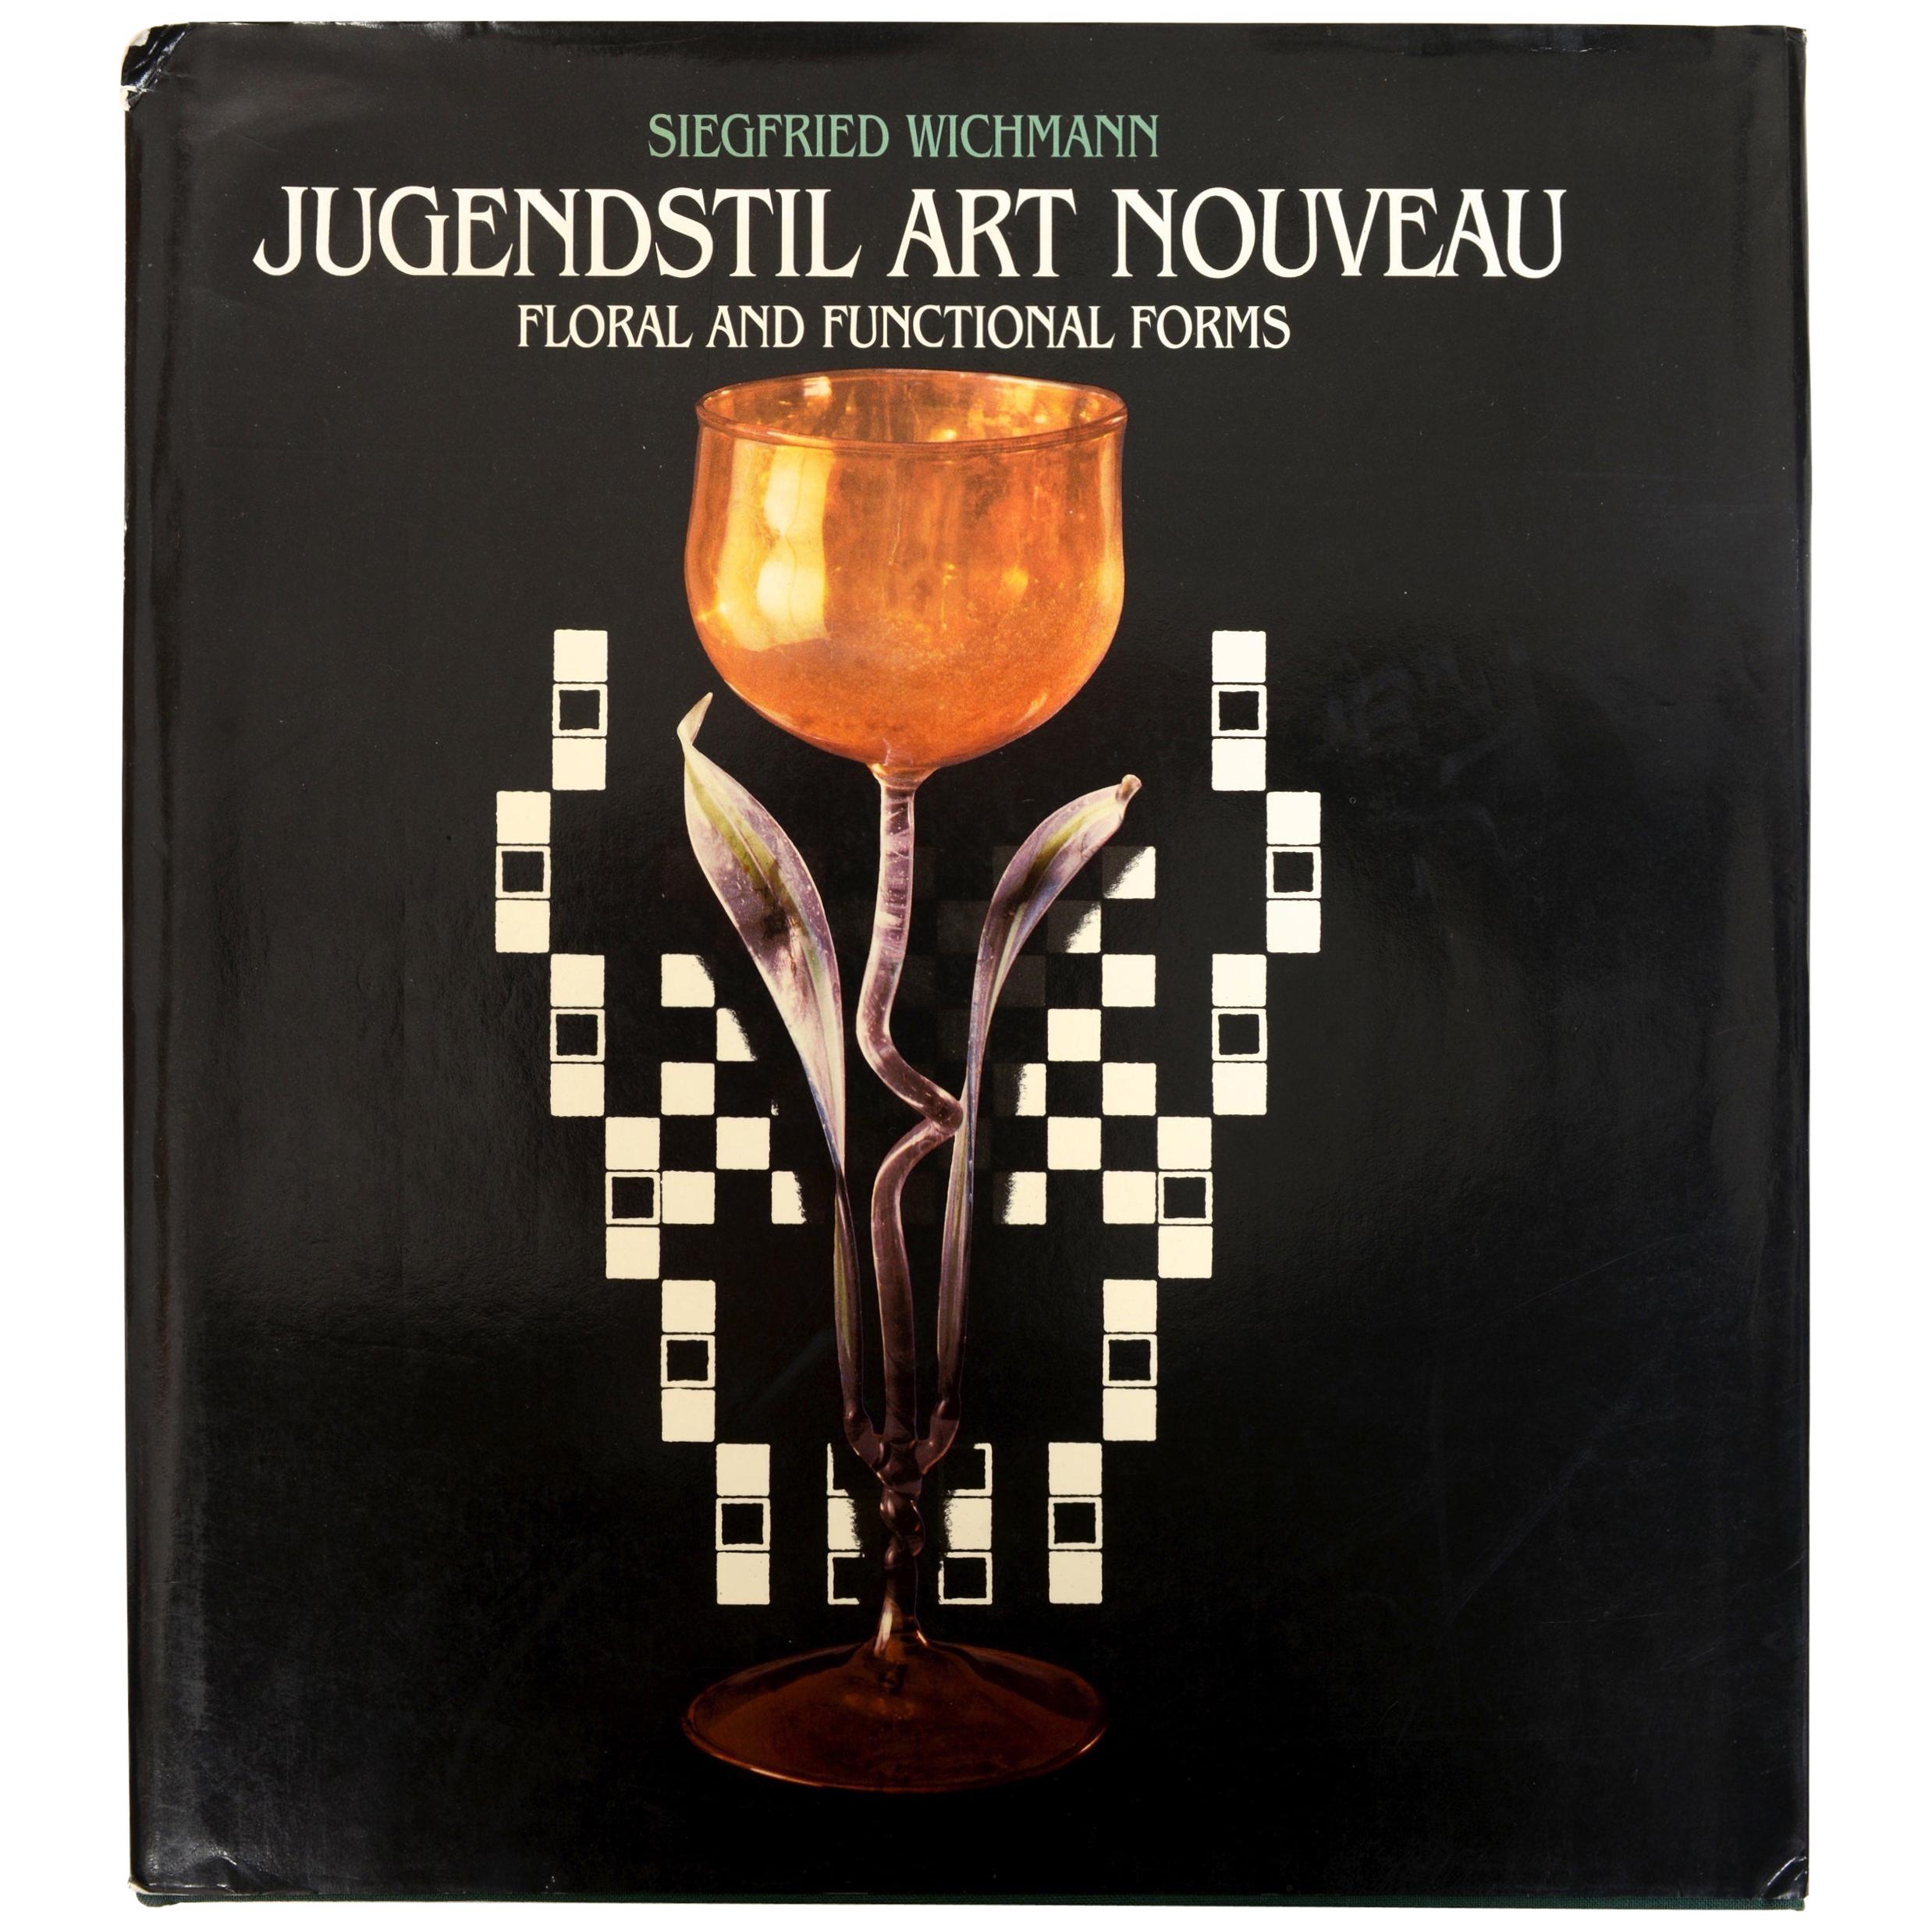 Jugendstil Art Nouveau: Floral and Functional Forms, by Siegfried Wichmann, 1st 